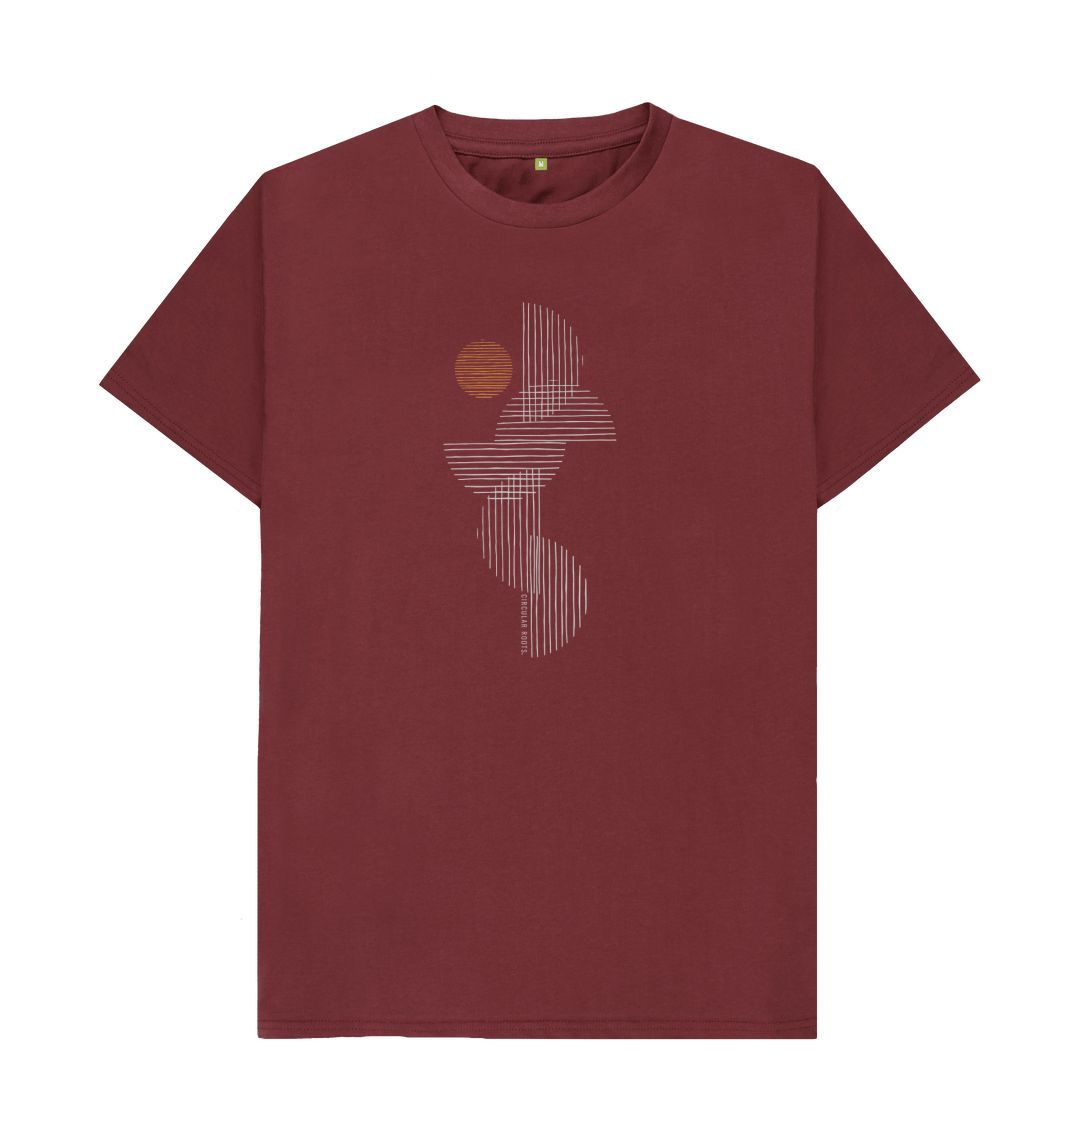 Red Wine Phases - Organic cotton t-shirt